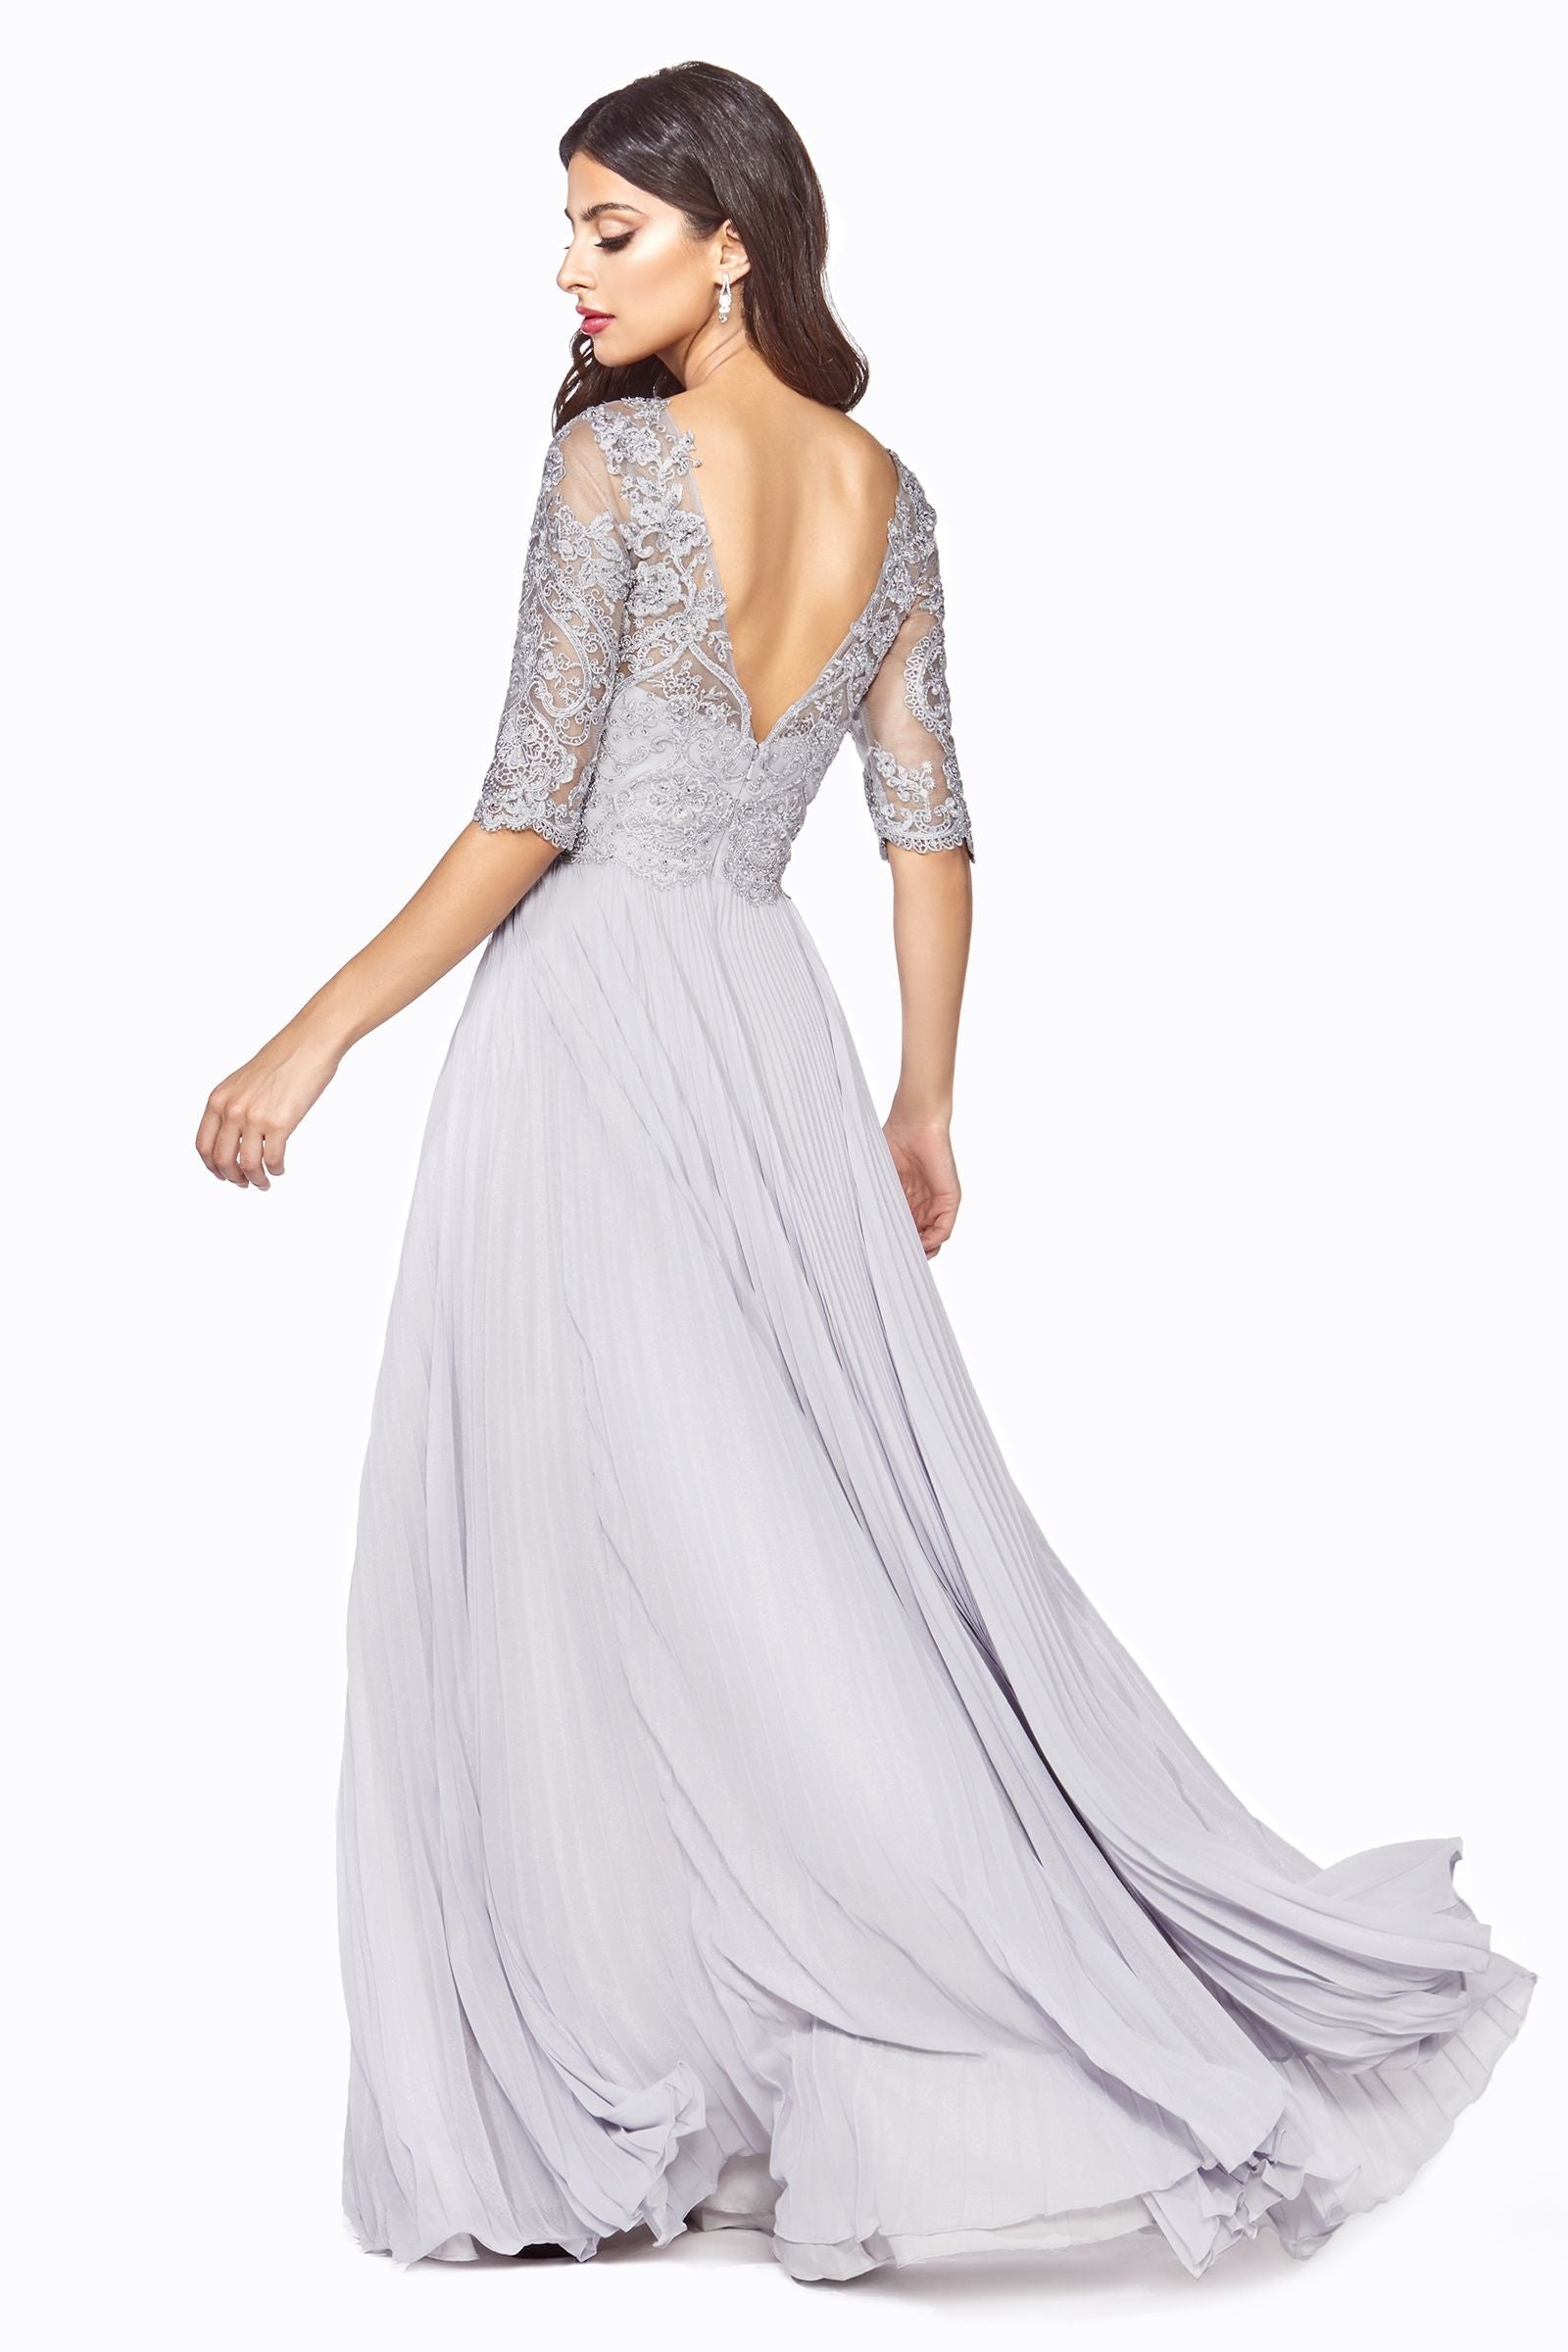 A-line dress with pleated chiffon skirt and embellished bodice-smcdress